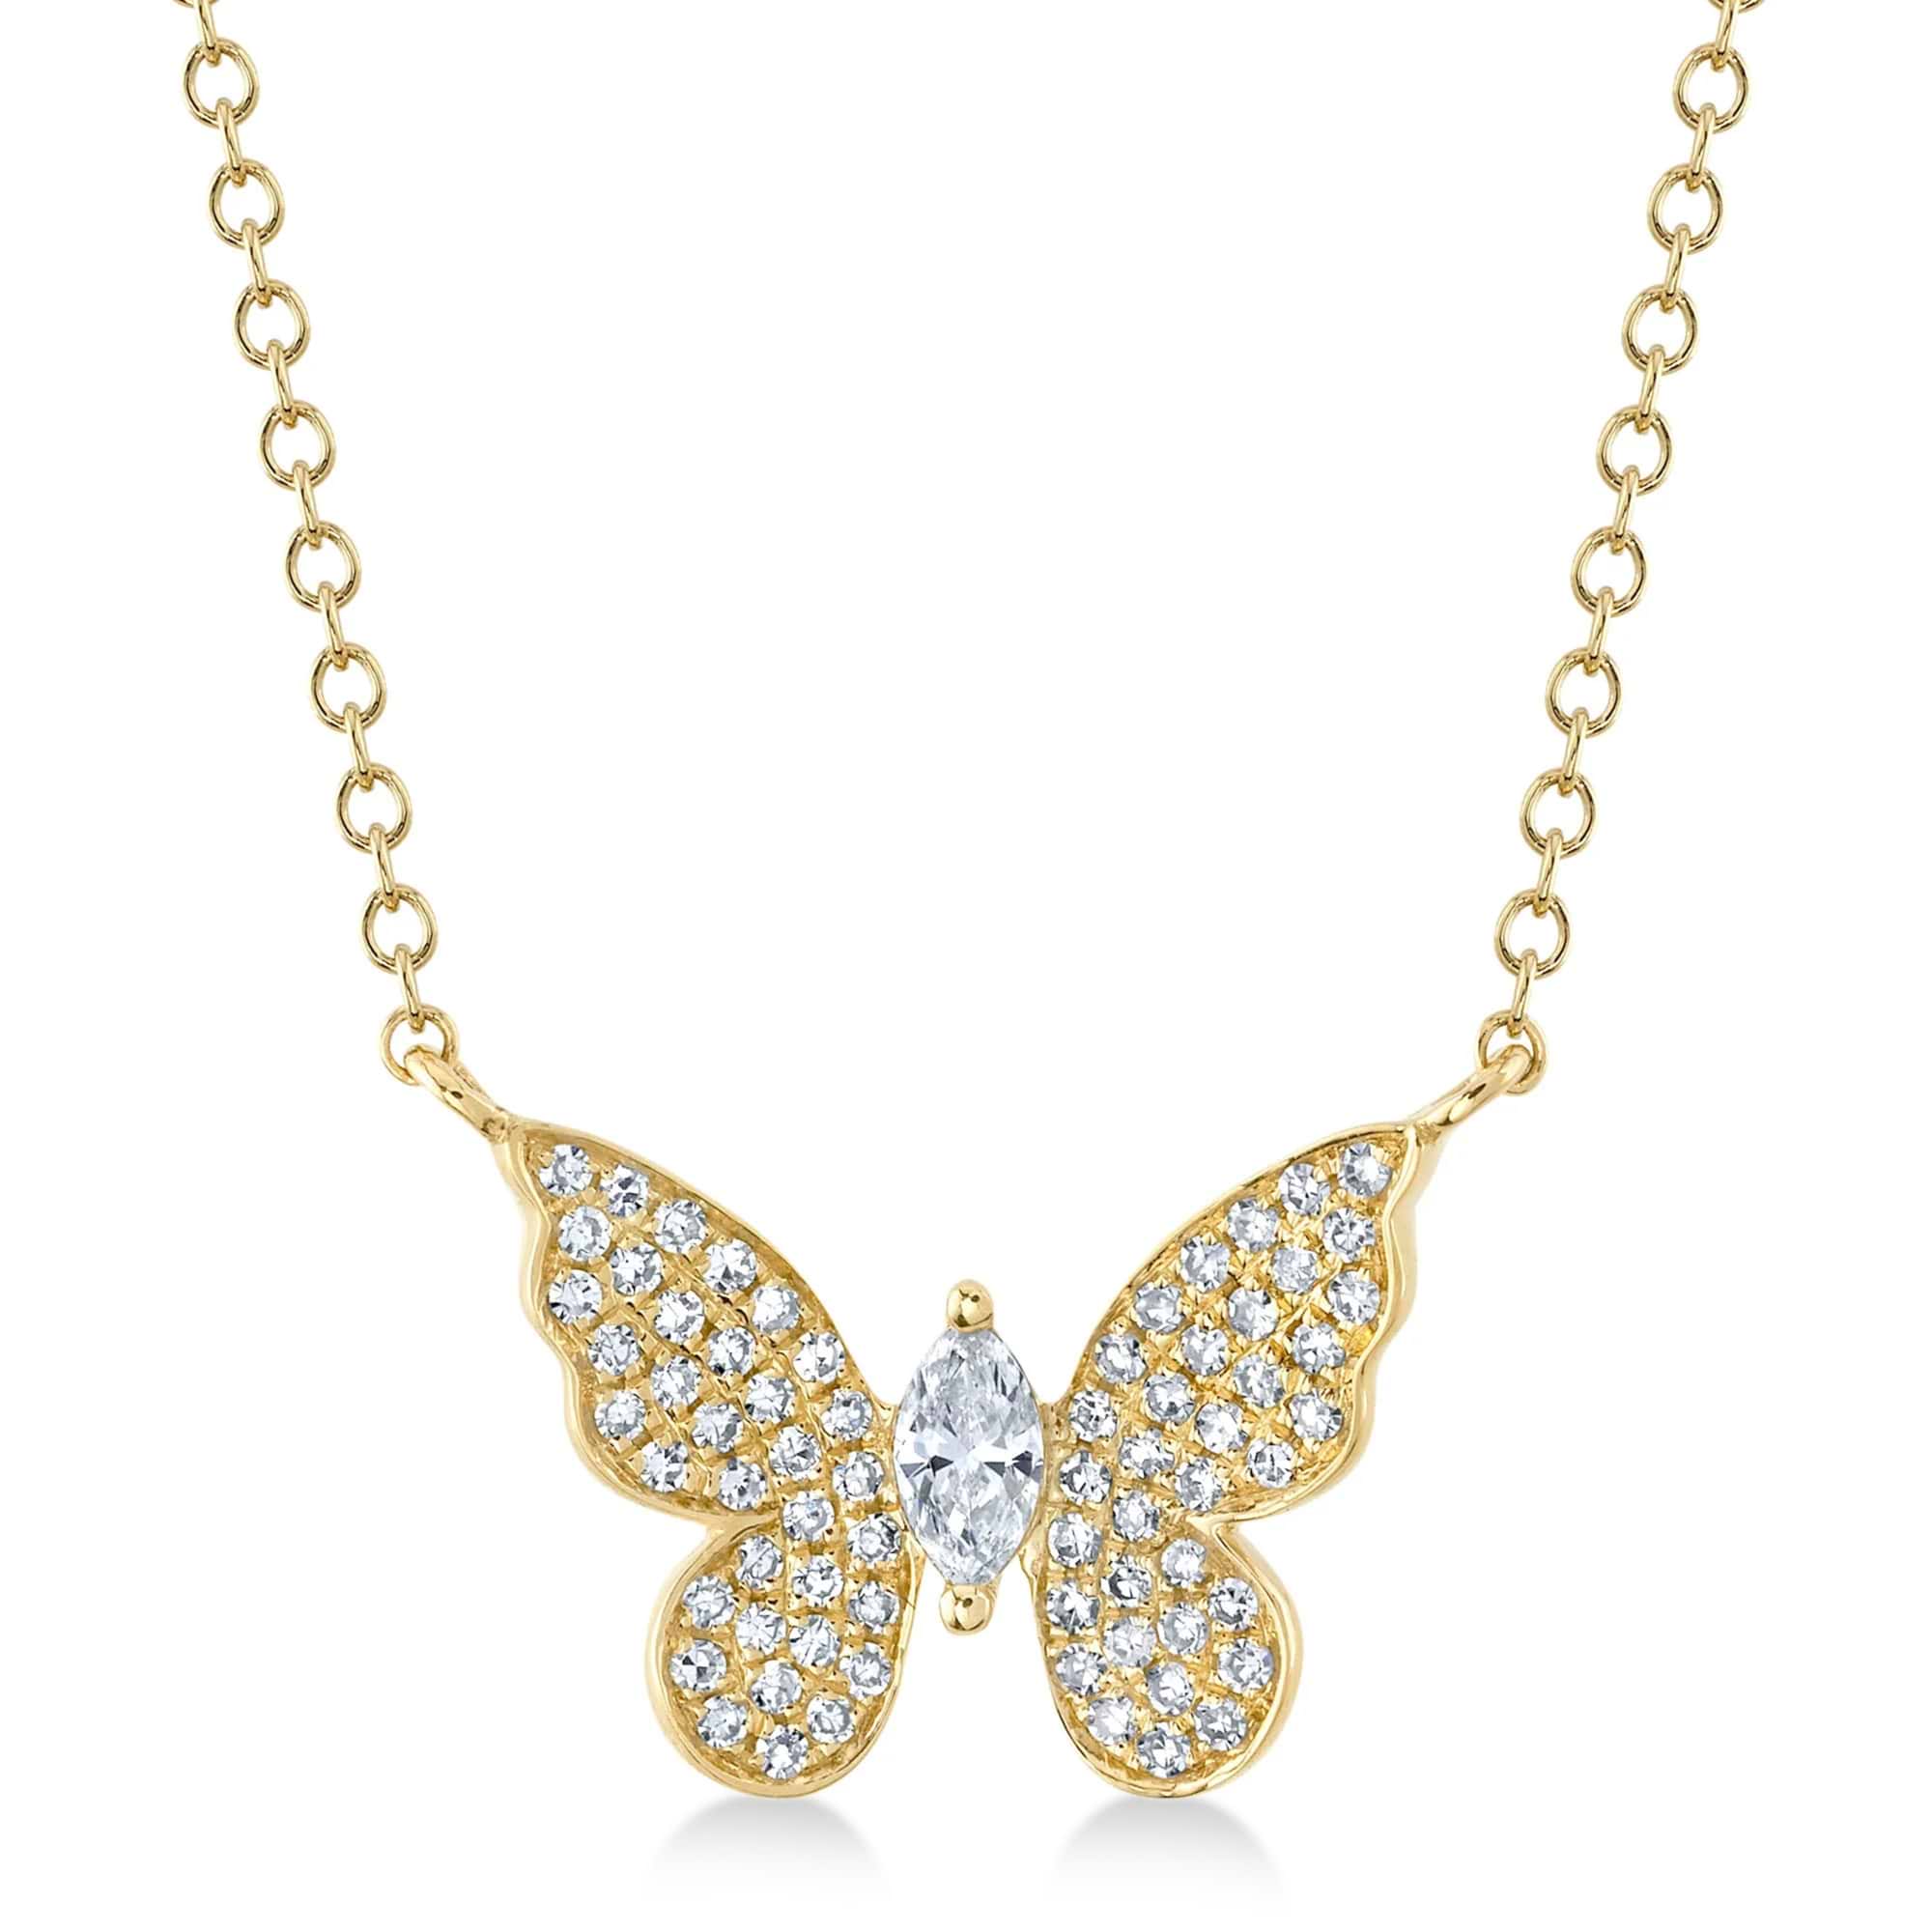 Diamond Marquise Butterly Necklace (0.23ct)